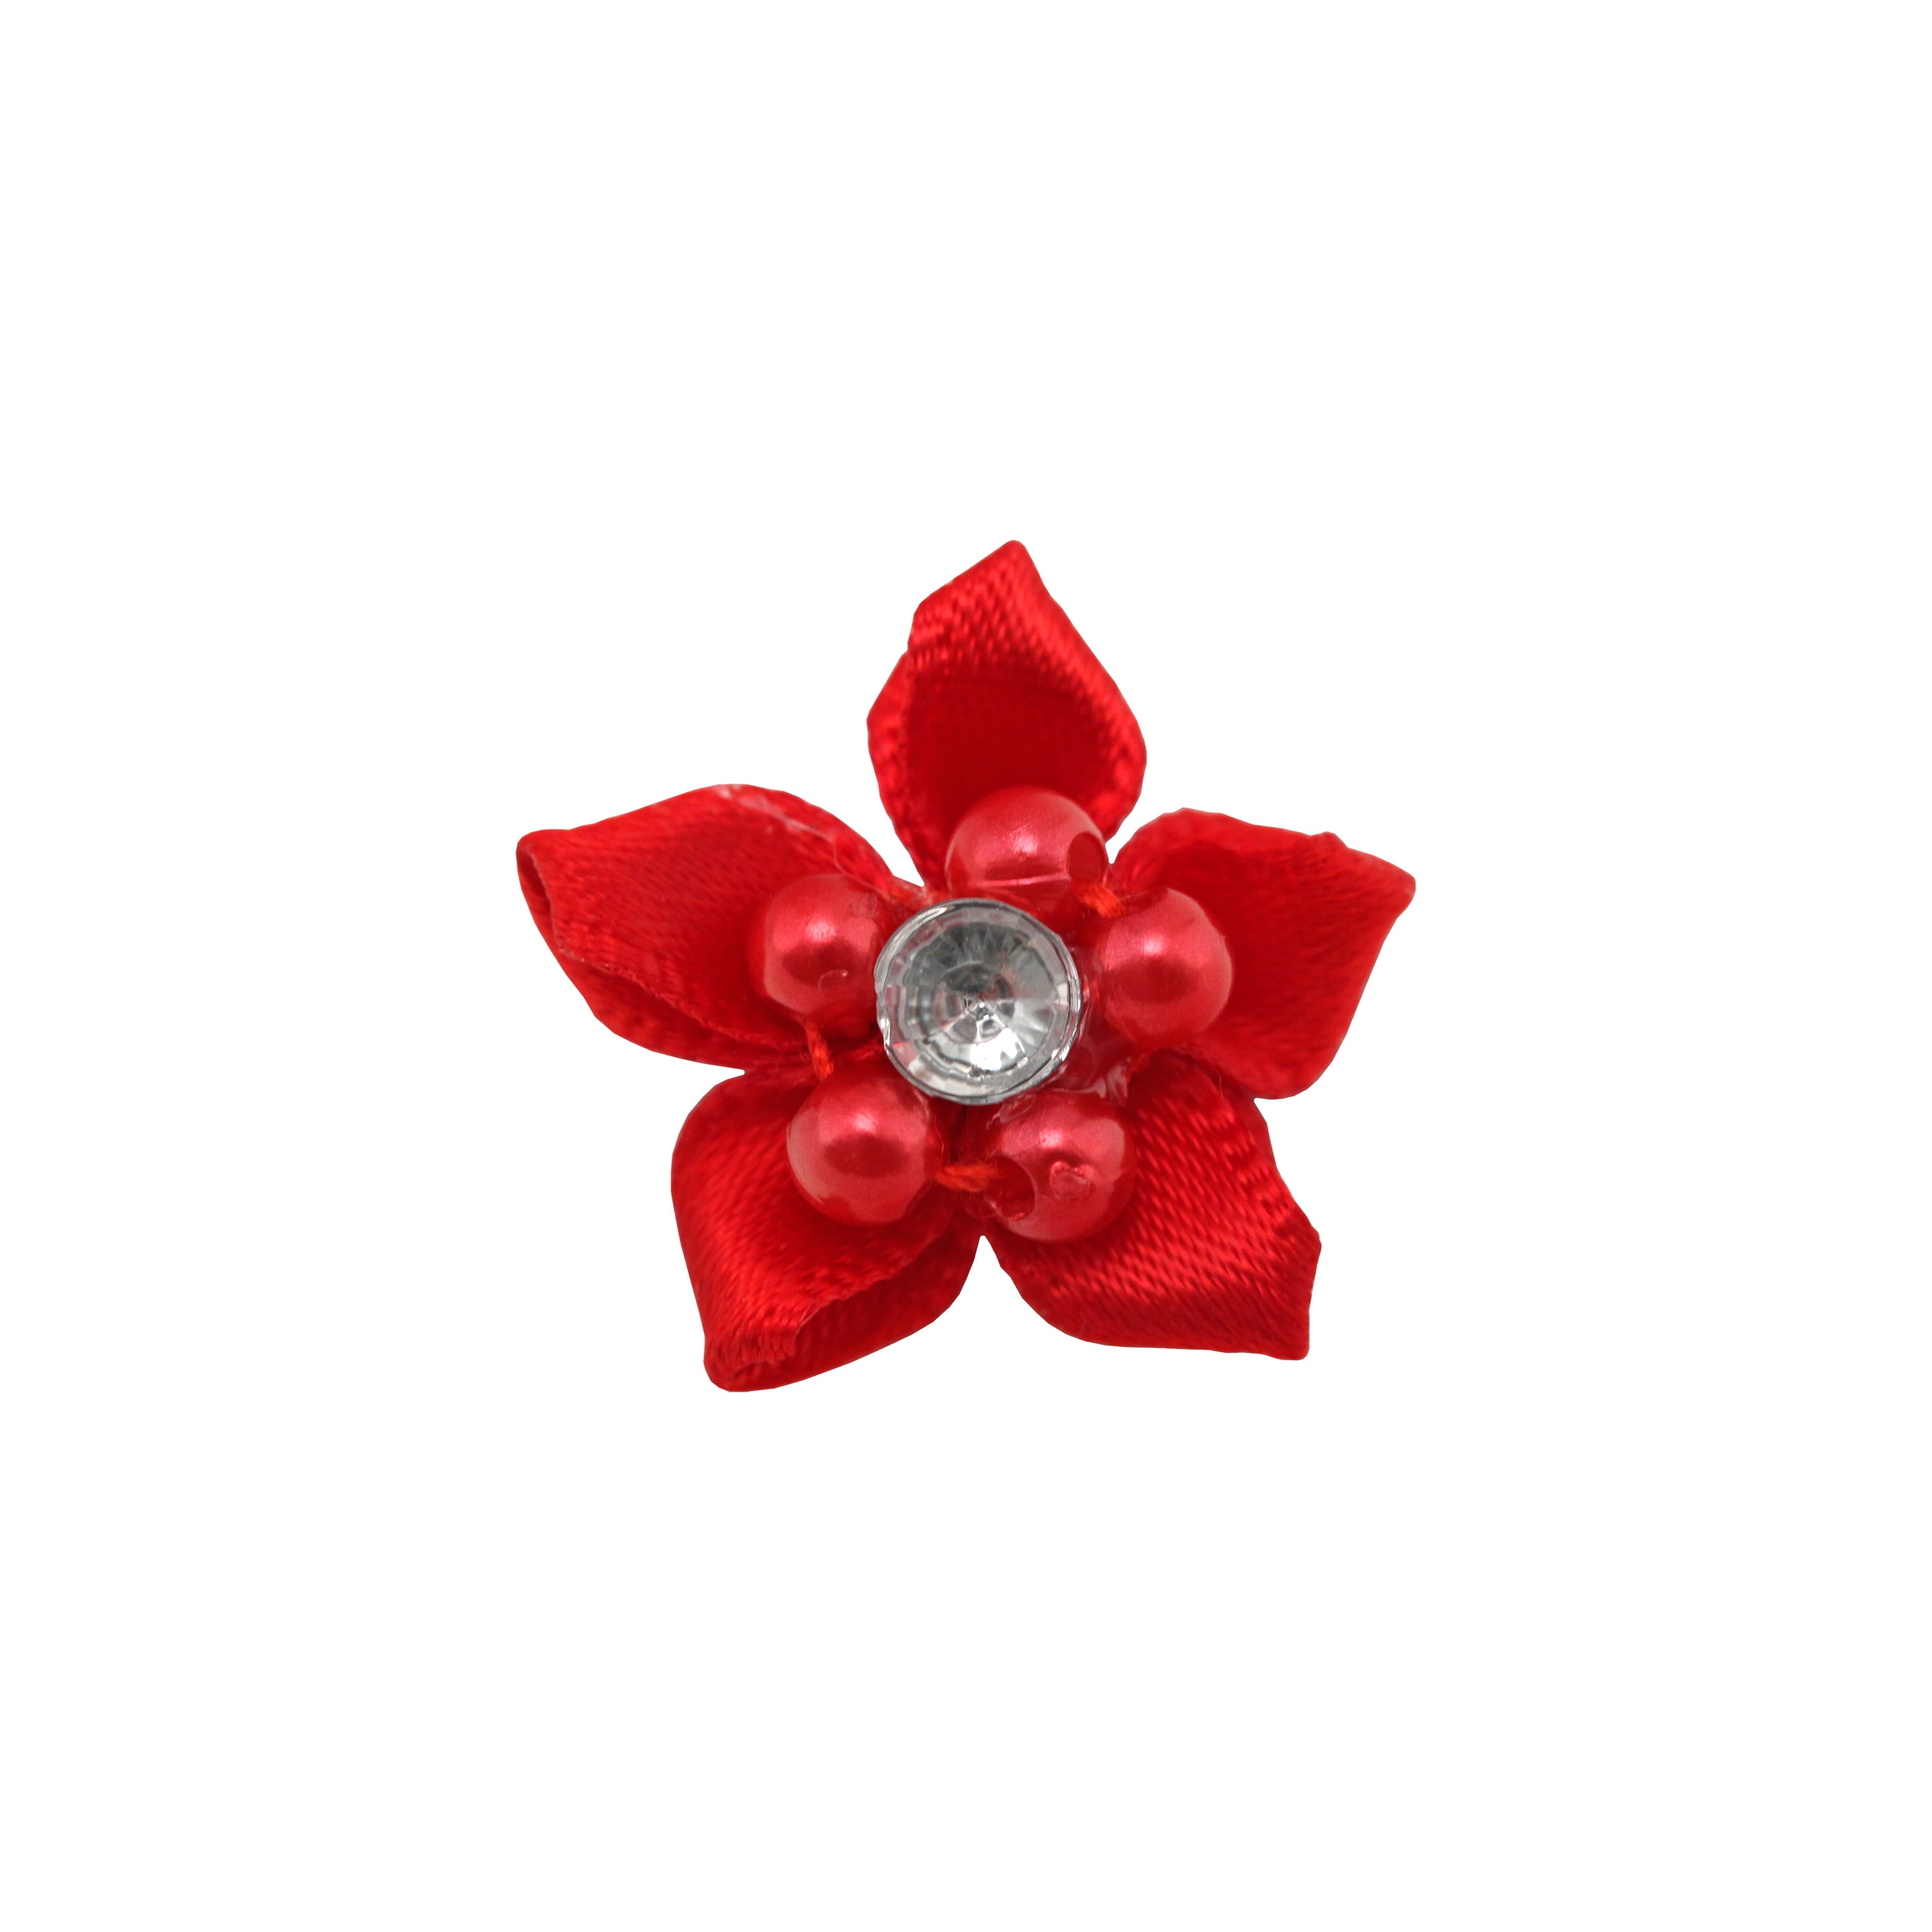 Offray Accessories, Red 3/4 inch 5 Petal Gem Flower Accessory for Wedding, Hair Clips, and Scrapbooking, 6 count, 1 Package